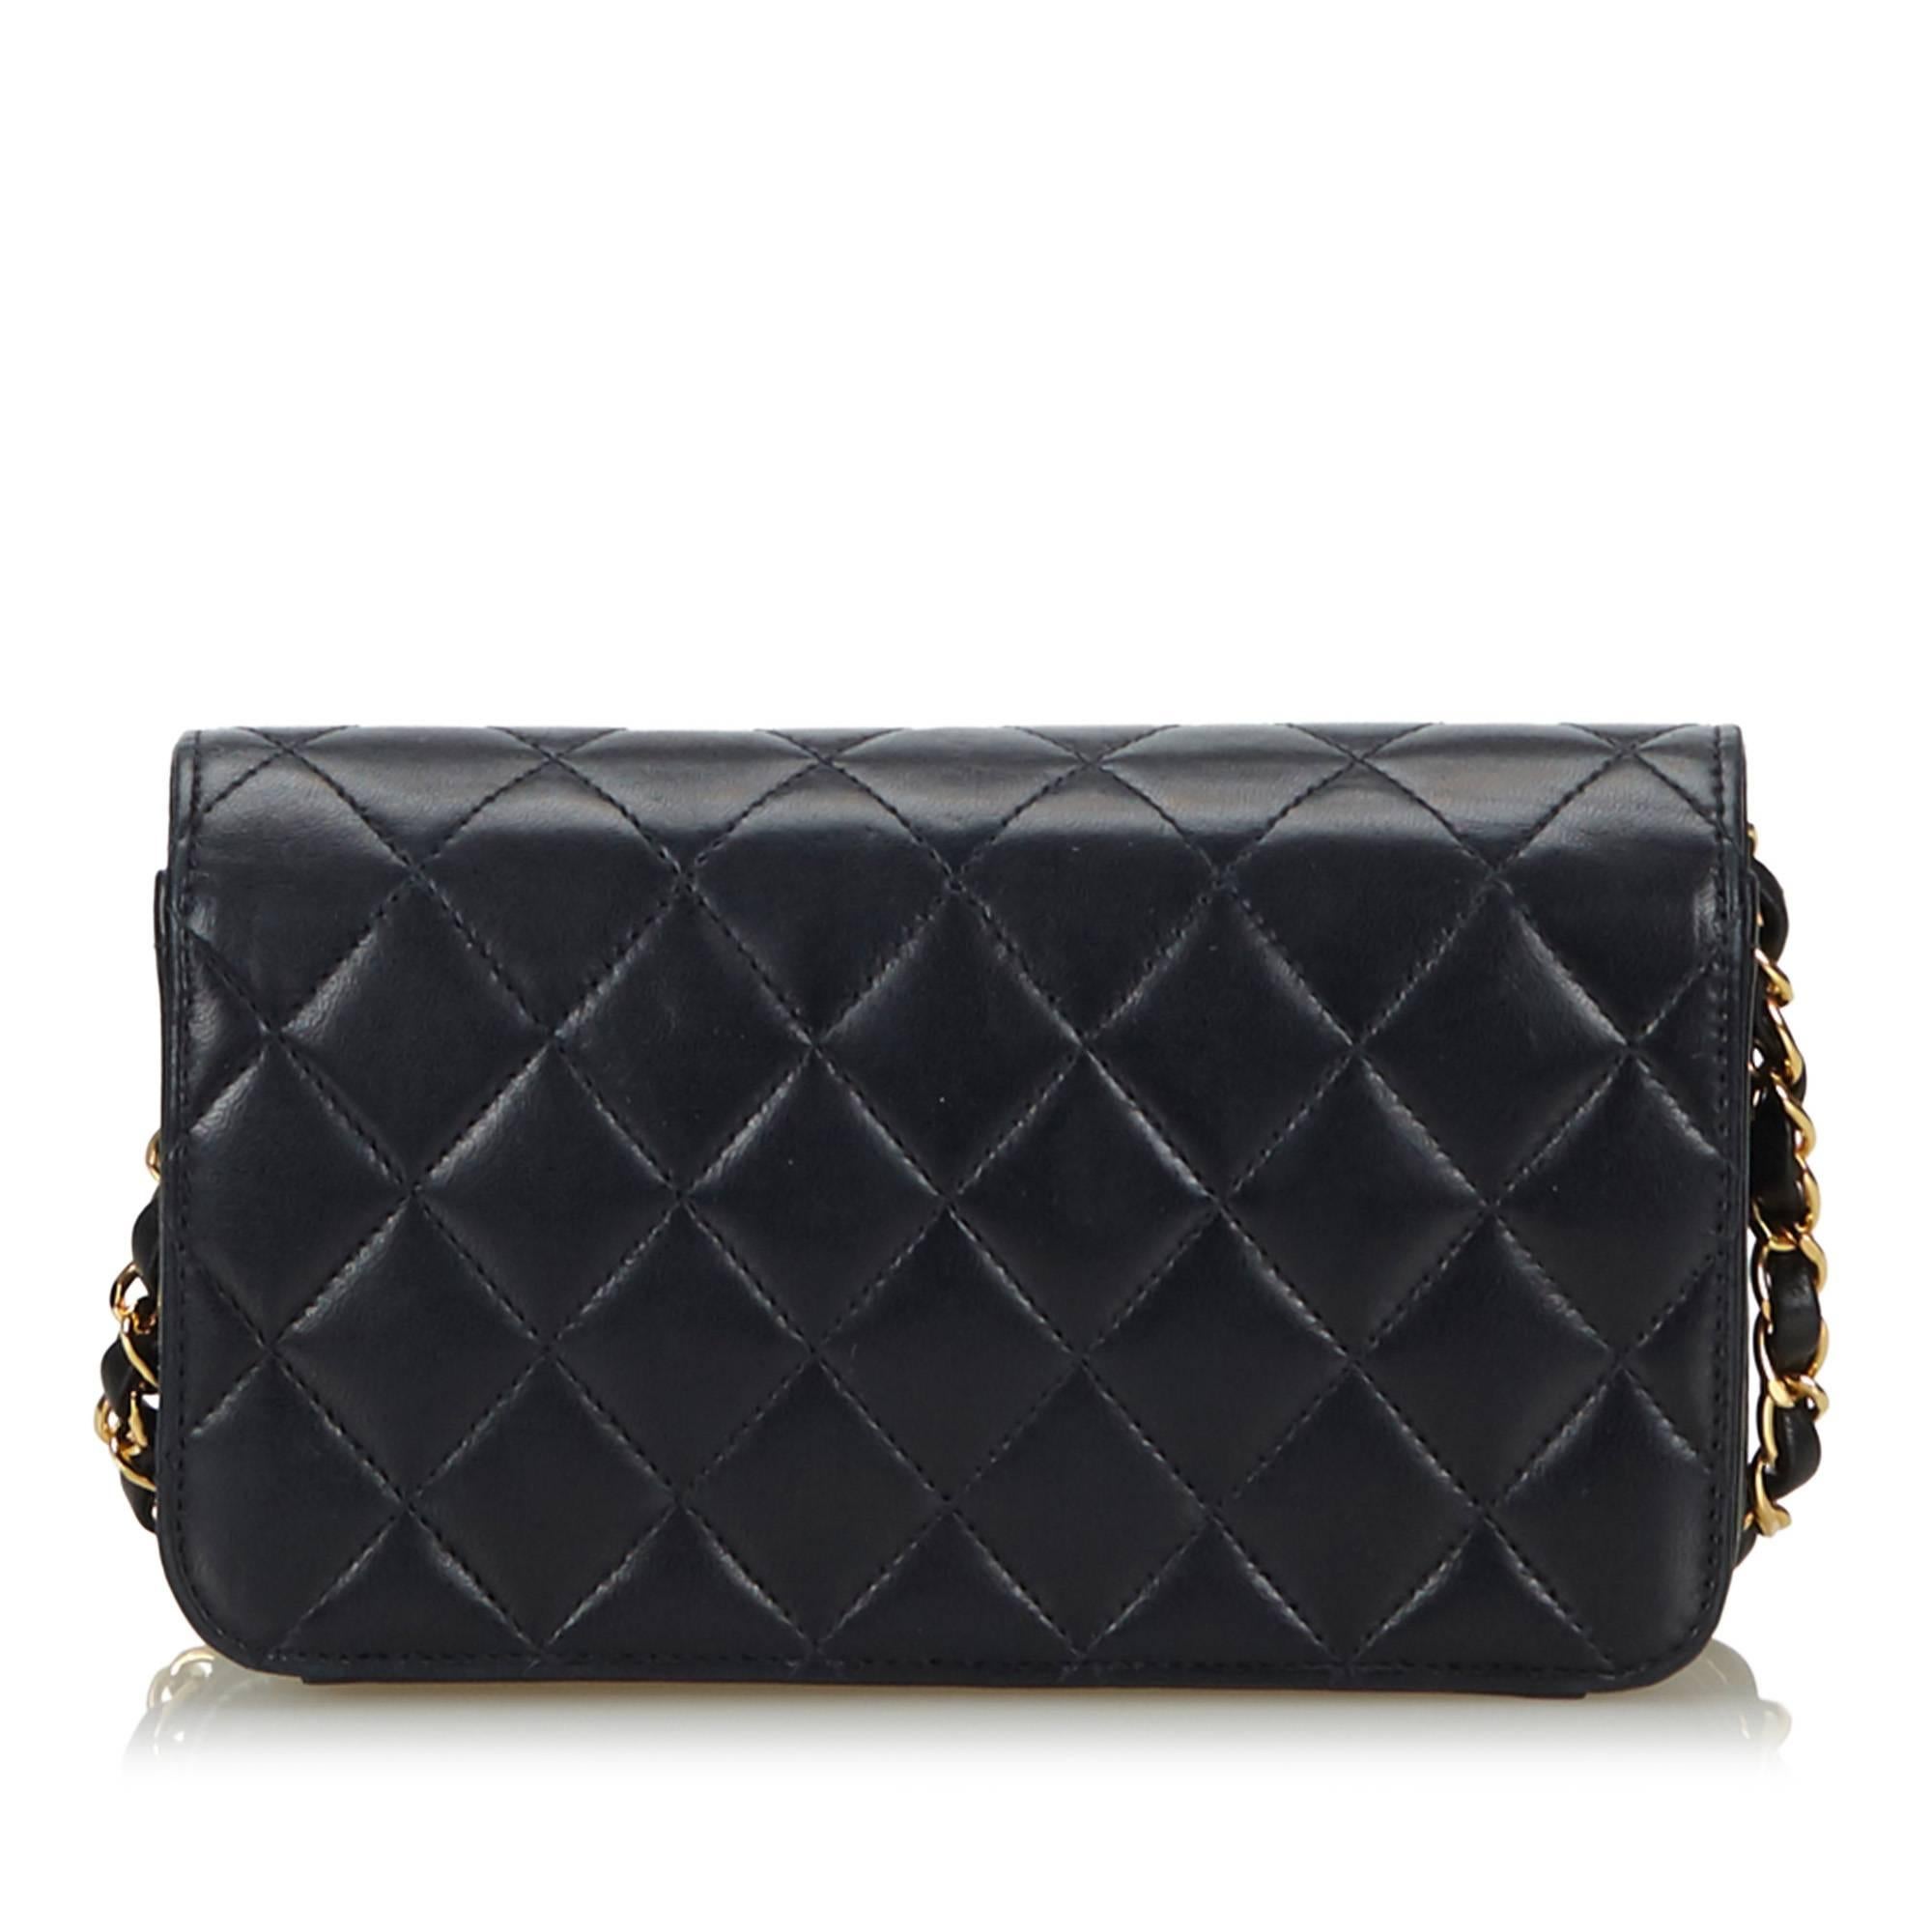 - This vintage black Chanel shoulder bag features a quilted lambskin leather body, a chain shoulder strap, a front gold toned 